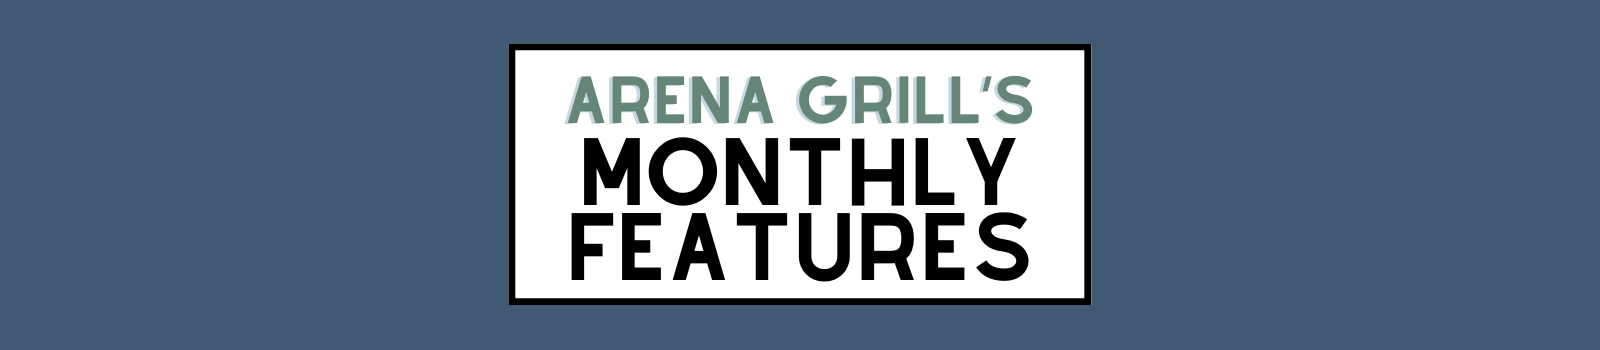 Arena Grill Features (2).png